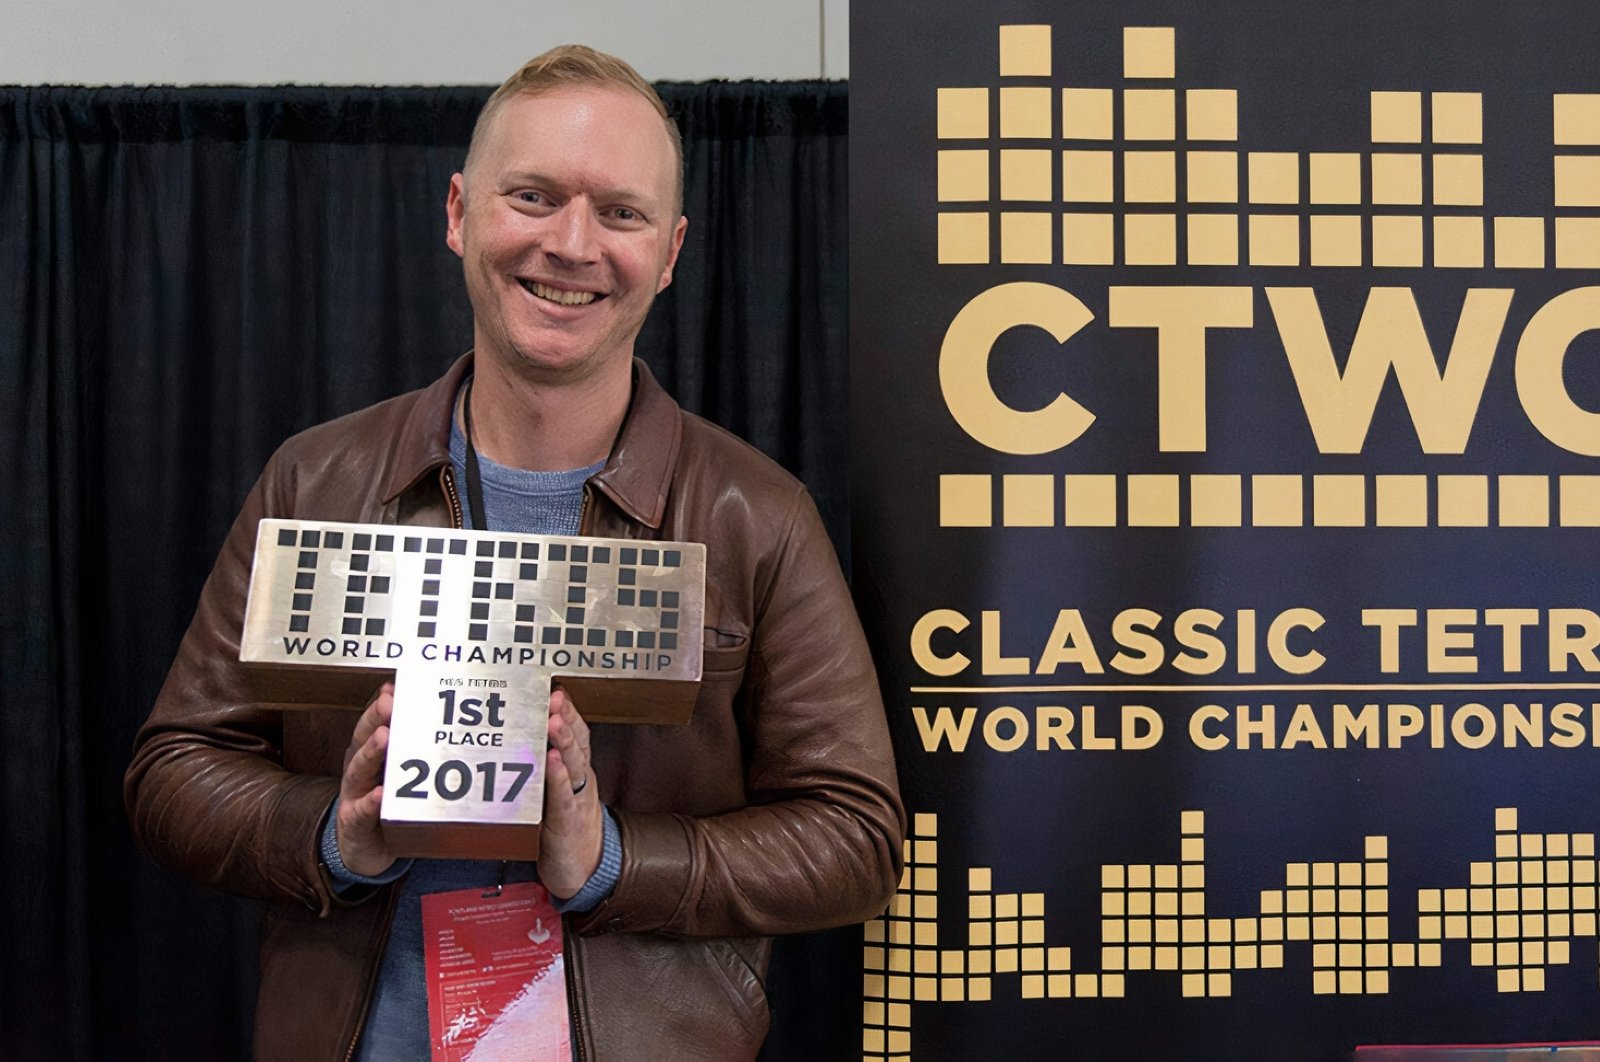 Jonas Neubauer poses with his trophy at the 8th annual Classic Tetris World Championship at the Portland Retro Gaming Expo at the Oregon Convention Center on Oct. 22, 2017. (Image Credit: Classic Tetris World Championship)